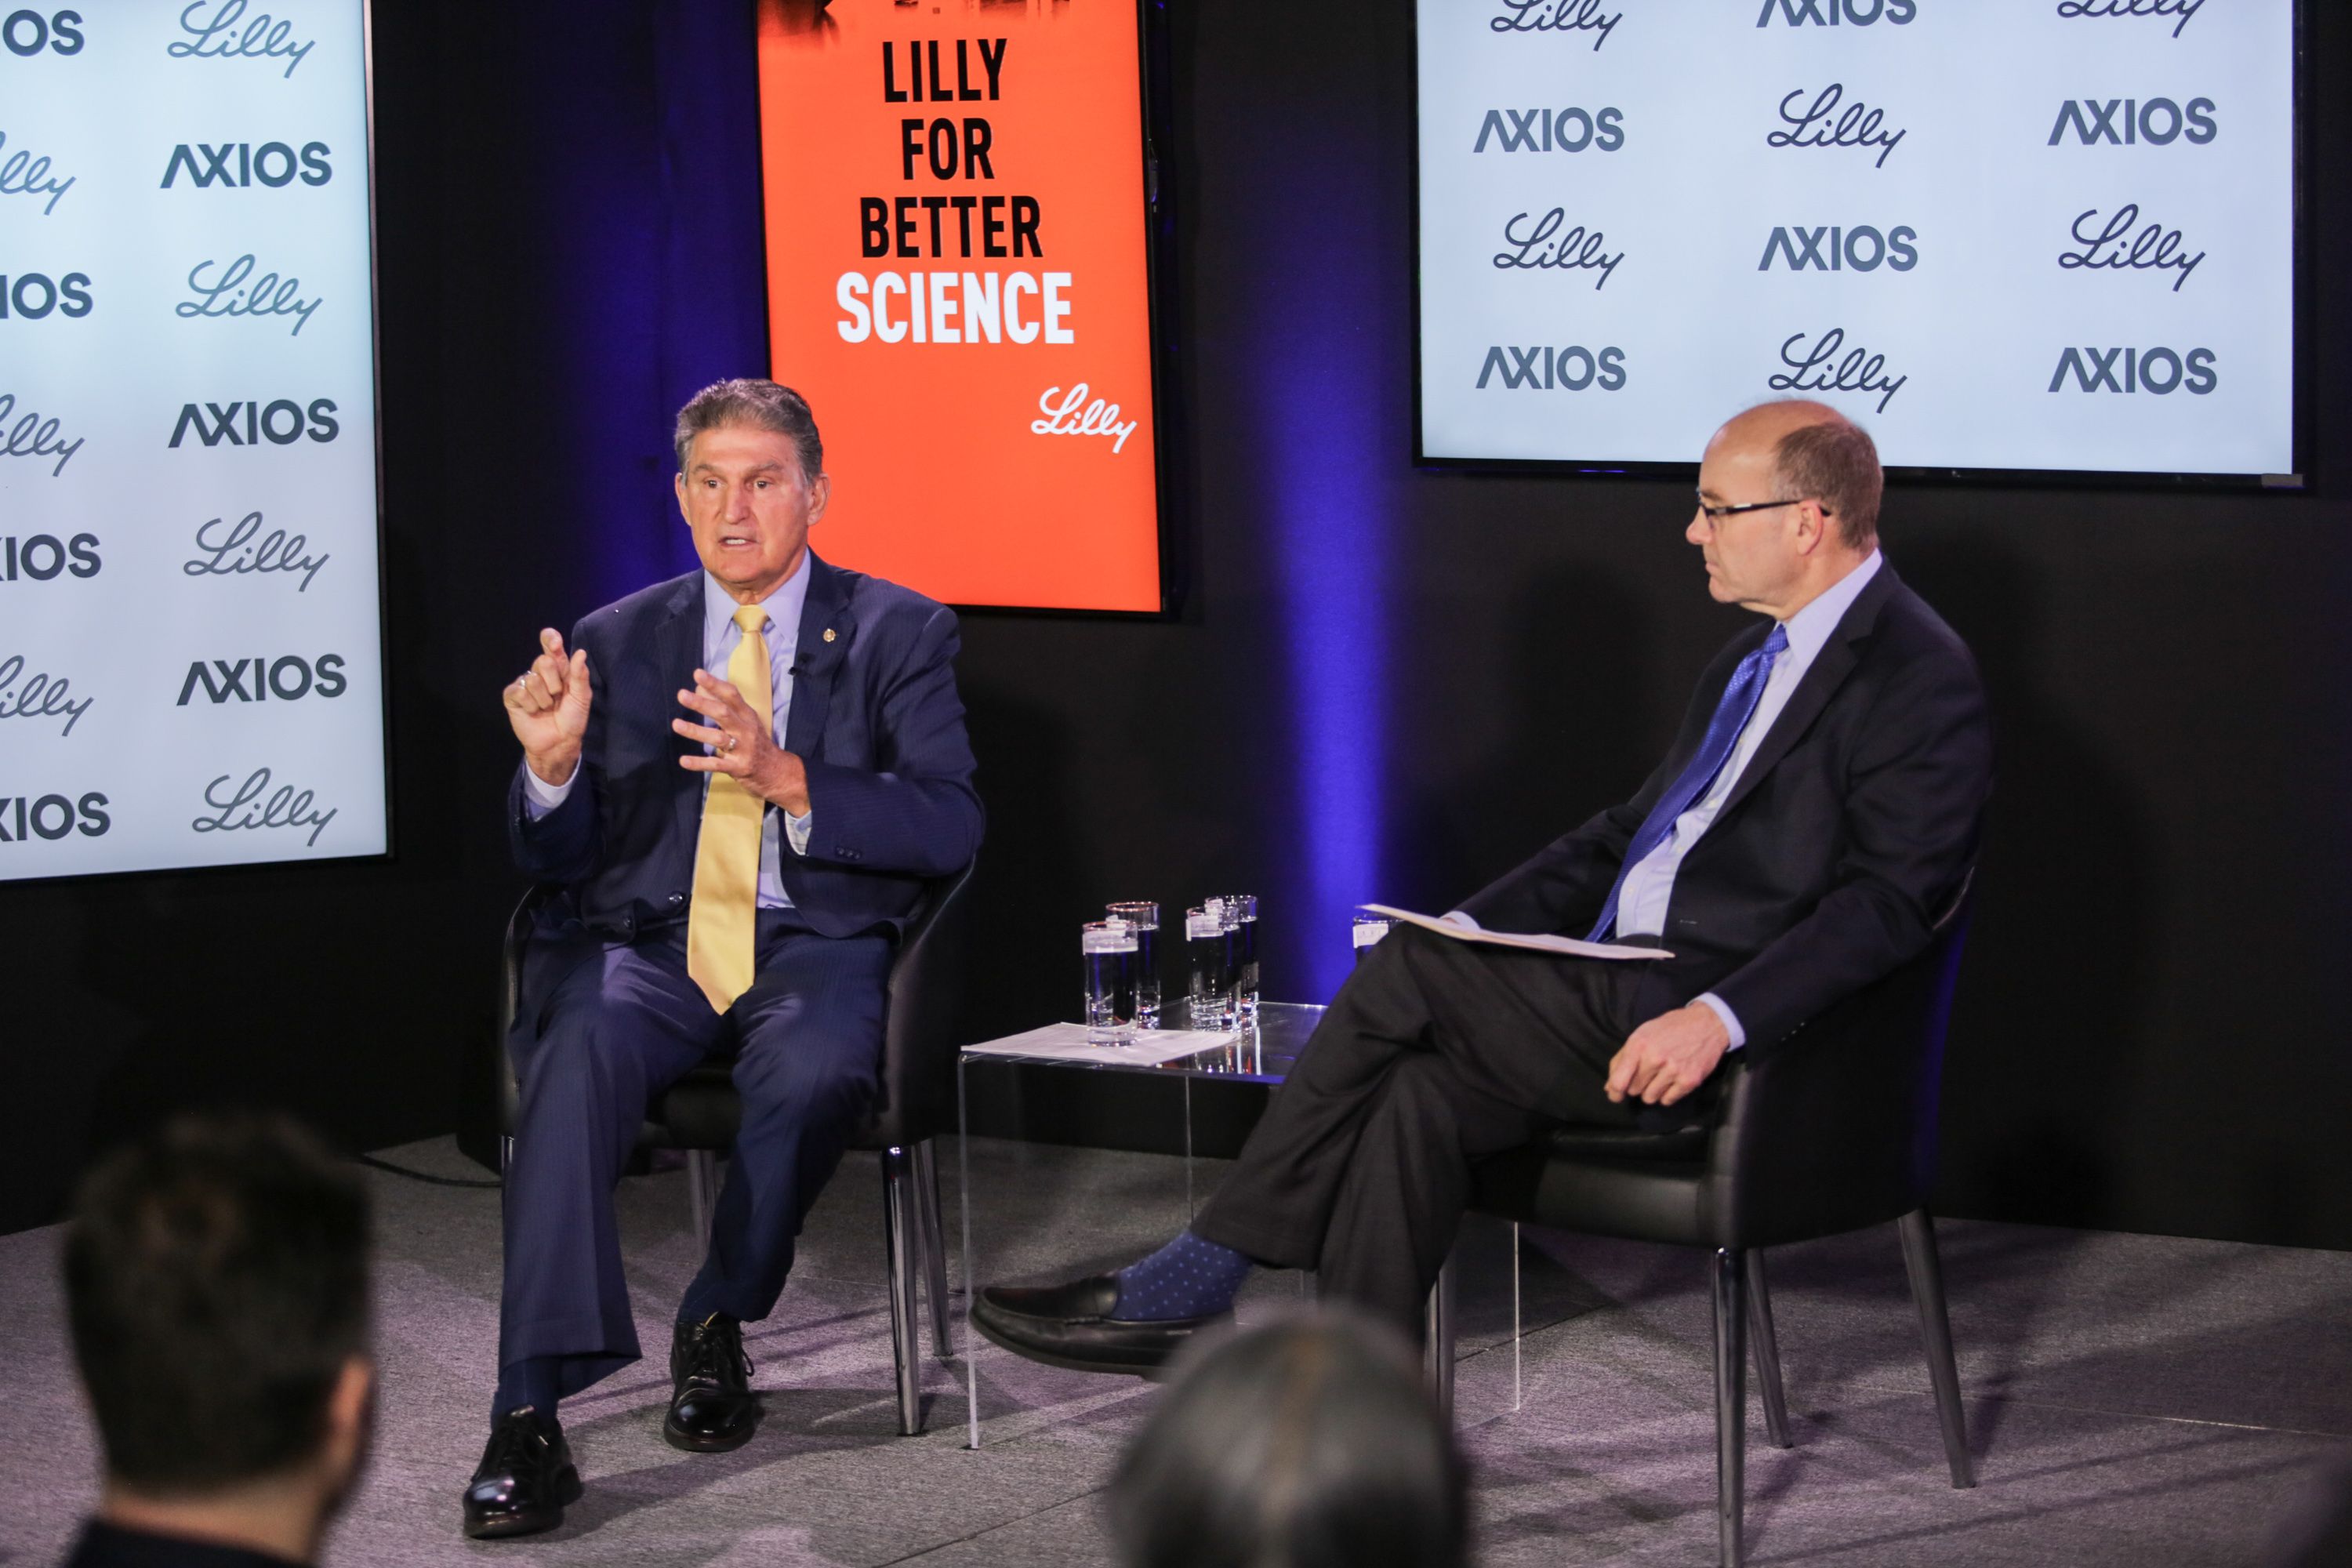 Senator Joe Manchin and Mike Allen in conversation on the Axios stage.